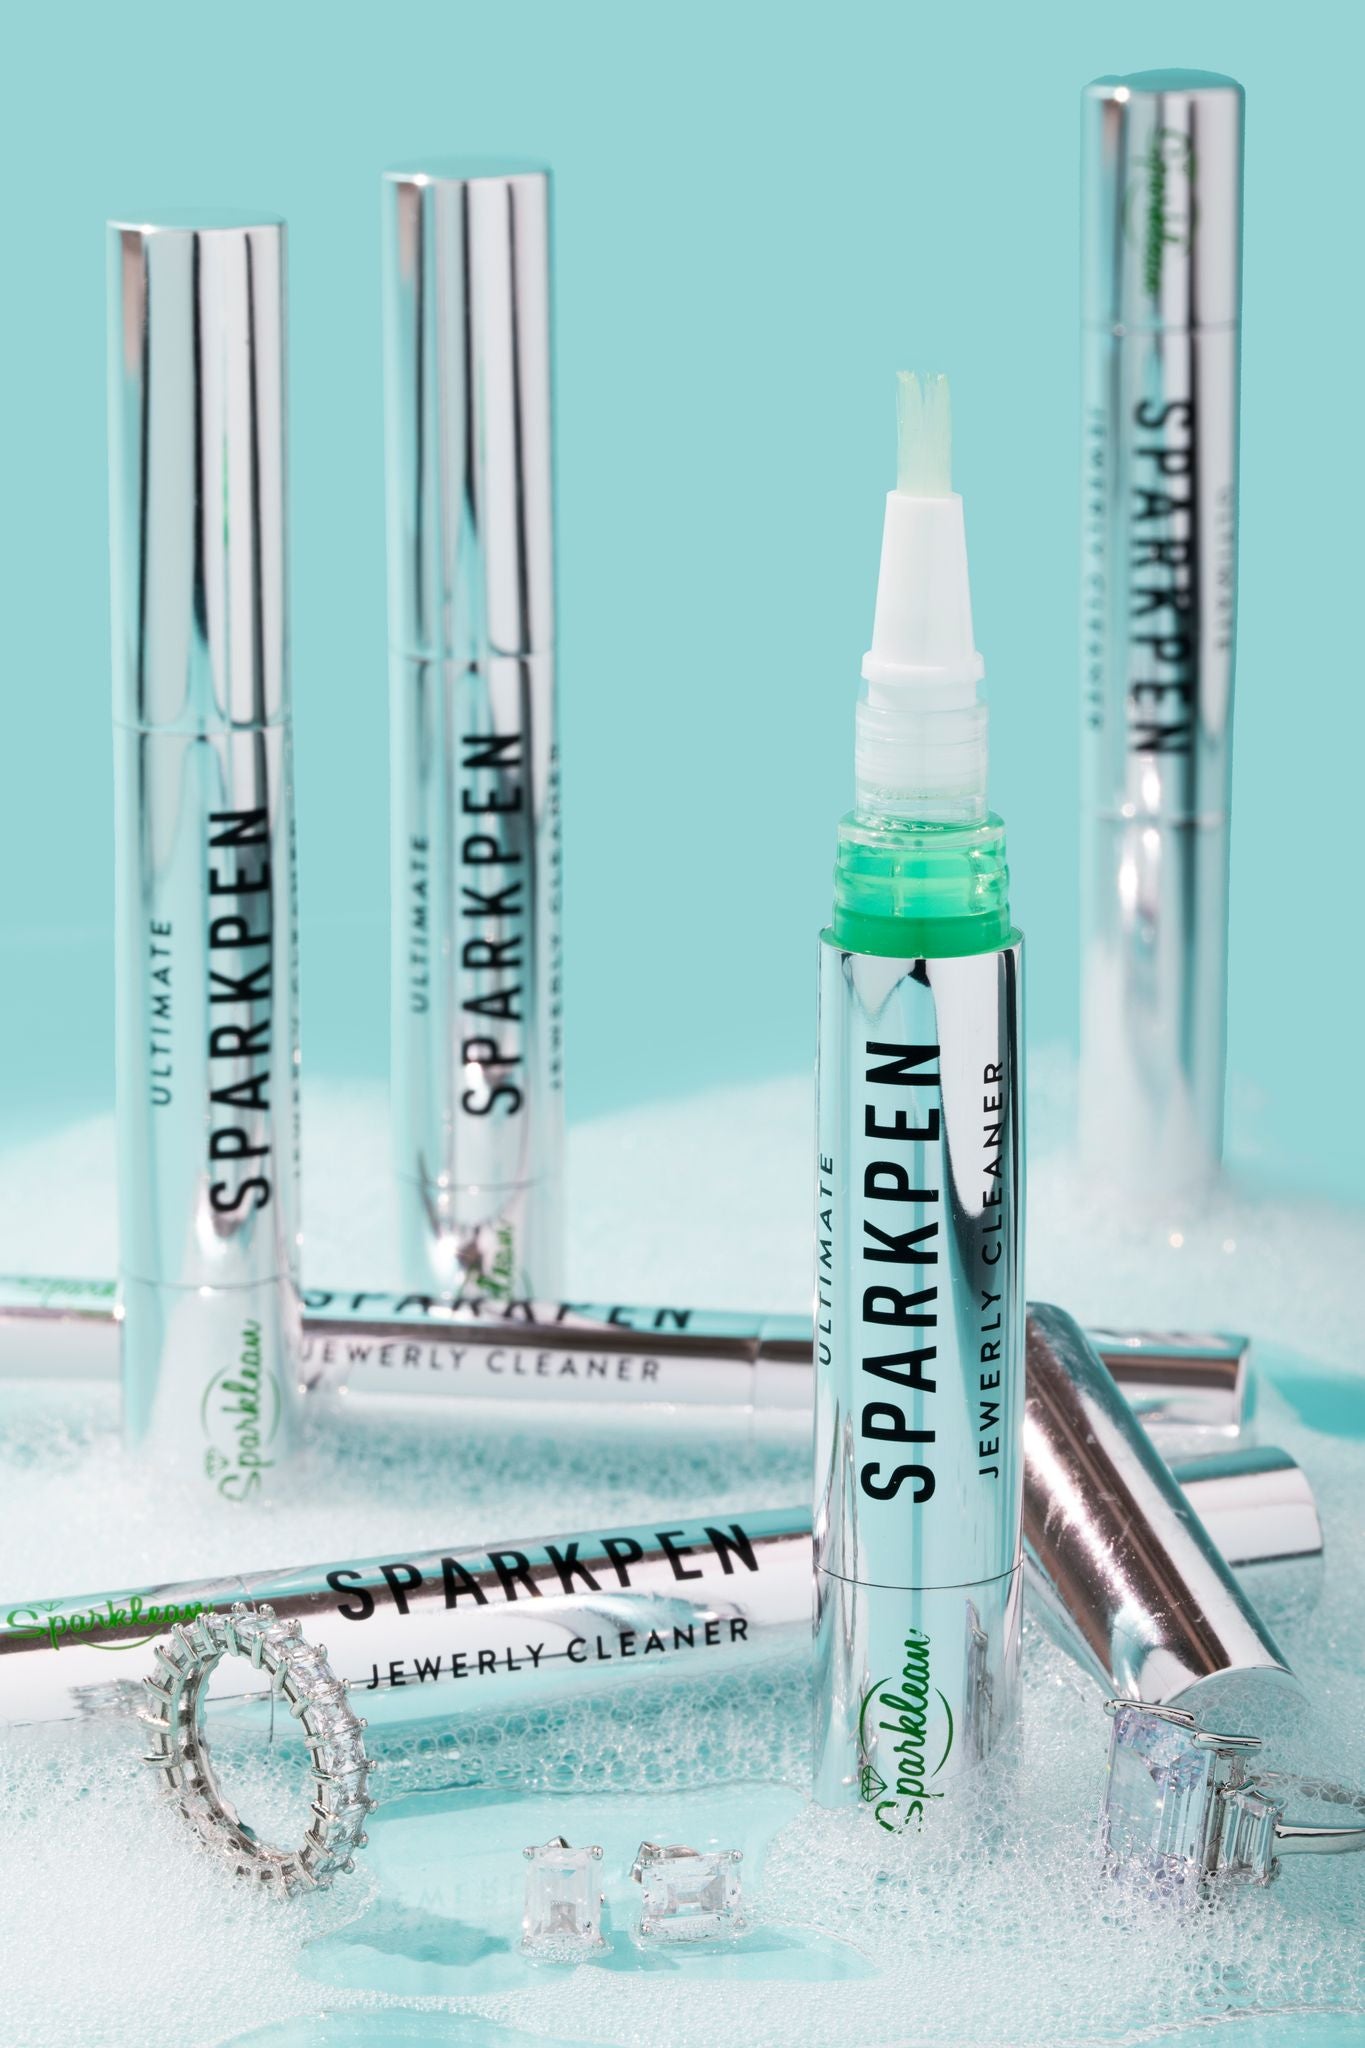 Sparklean Sparkpen: Natural, Non-Abrasive Fine-Tip Jewelry Cleaner – Ideal for Diamonds, Precious Metals, and Gemstones